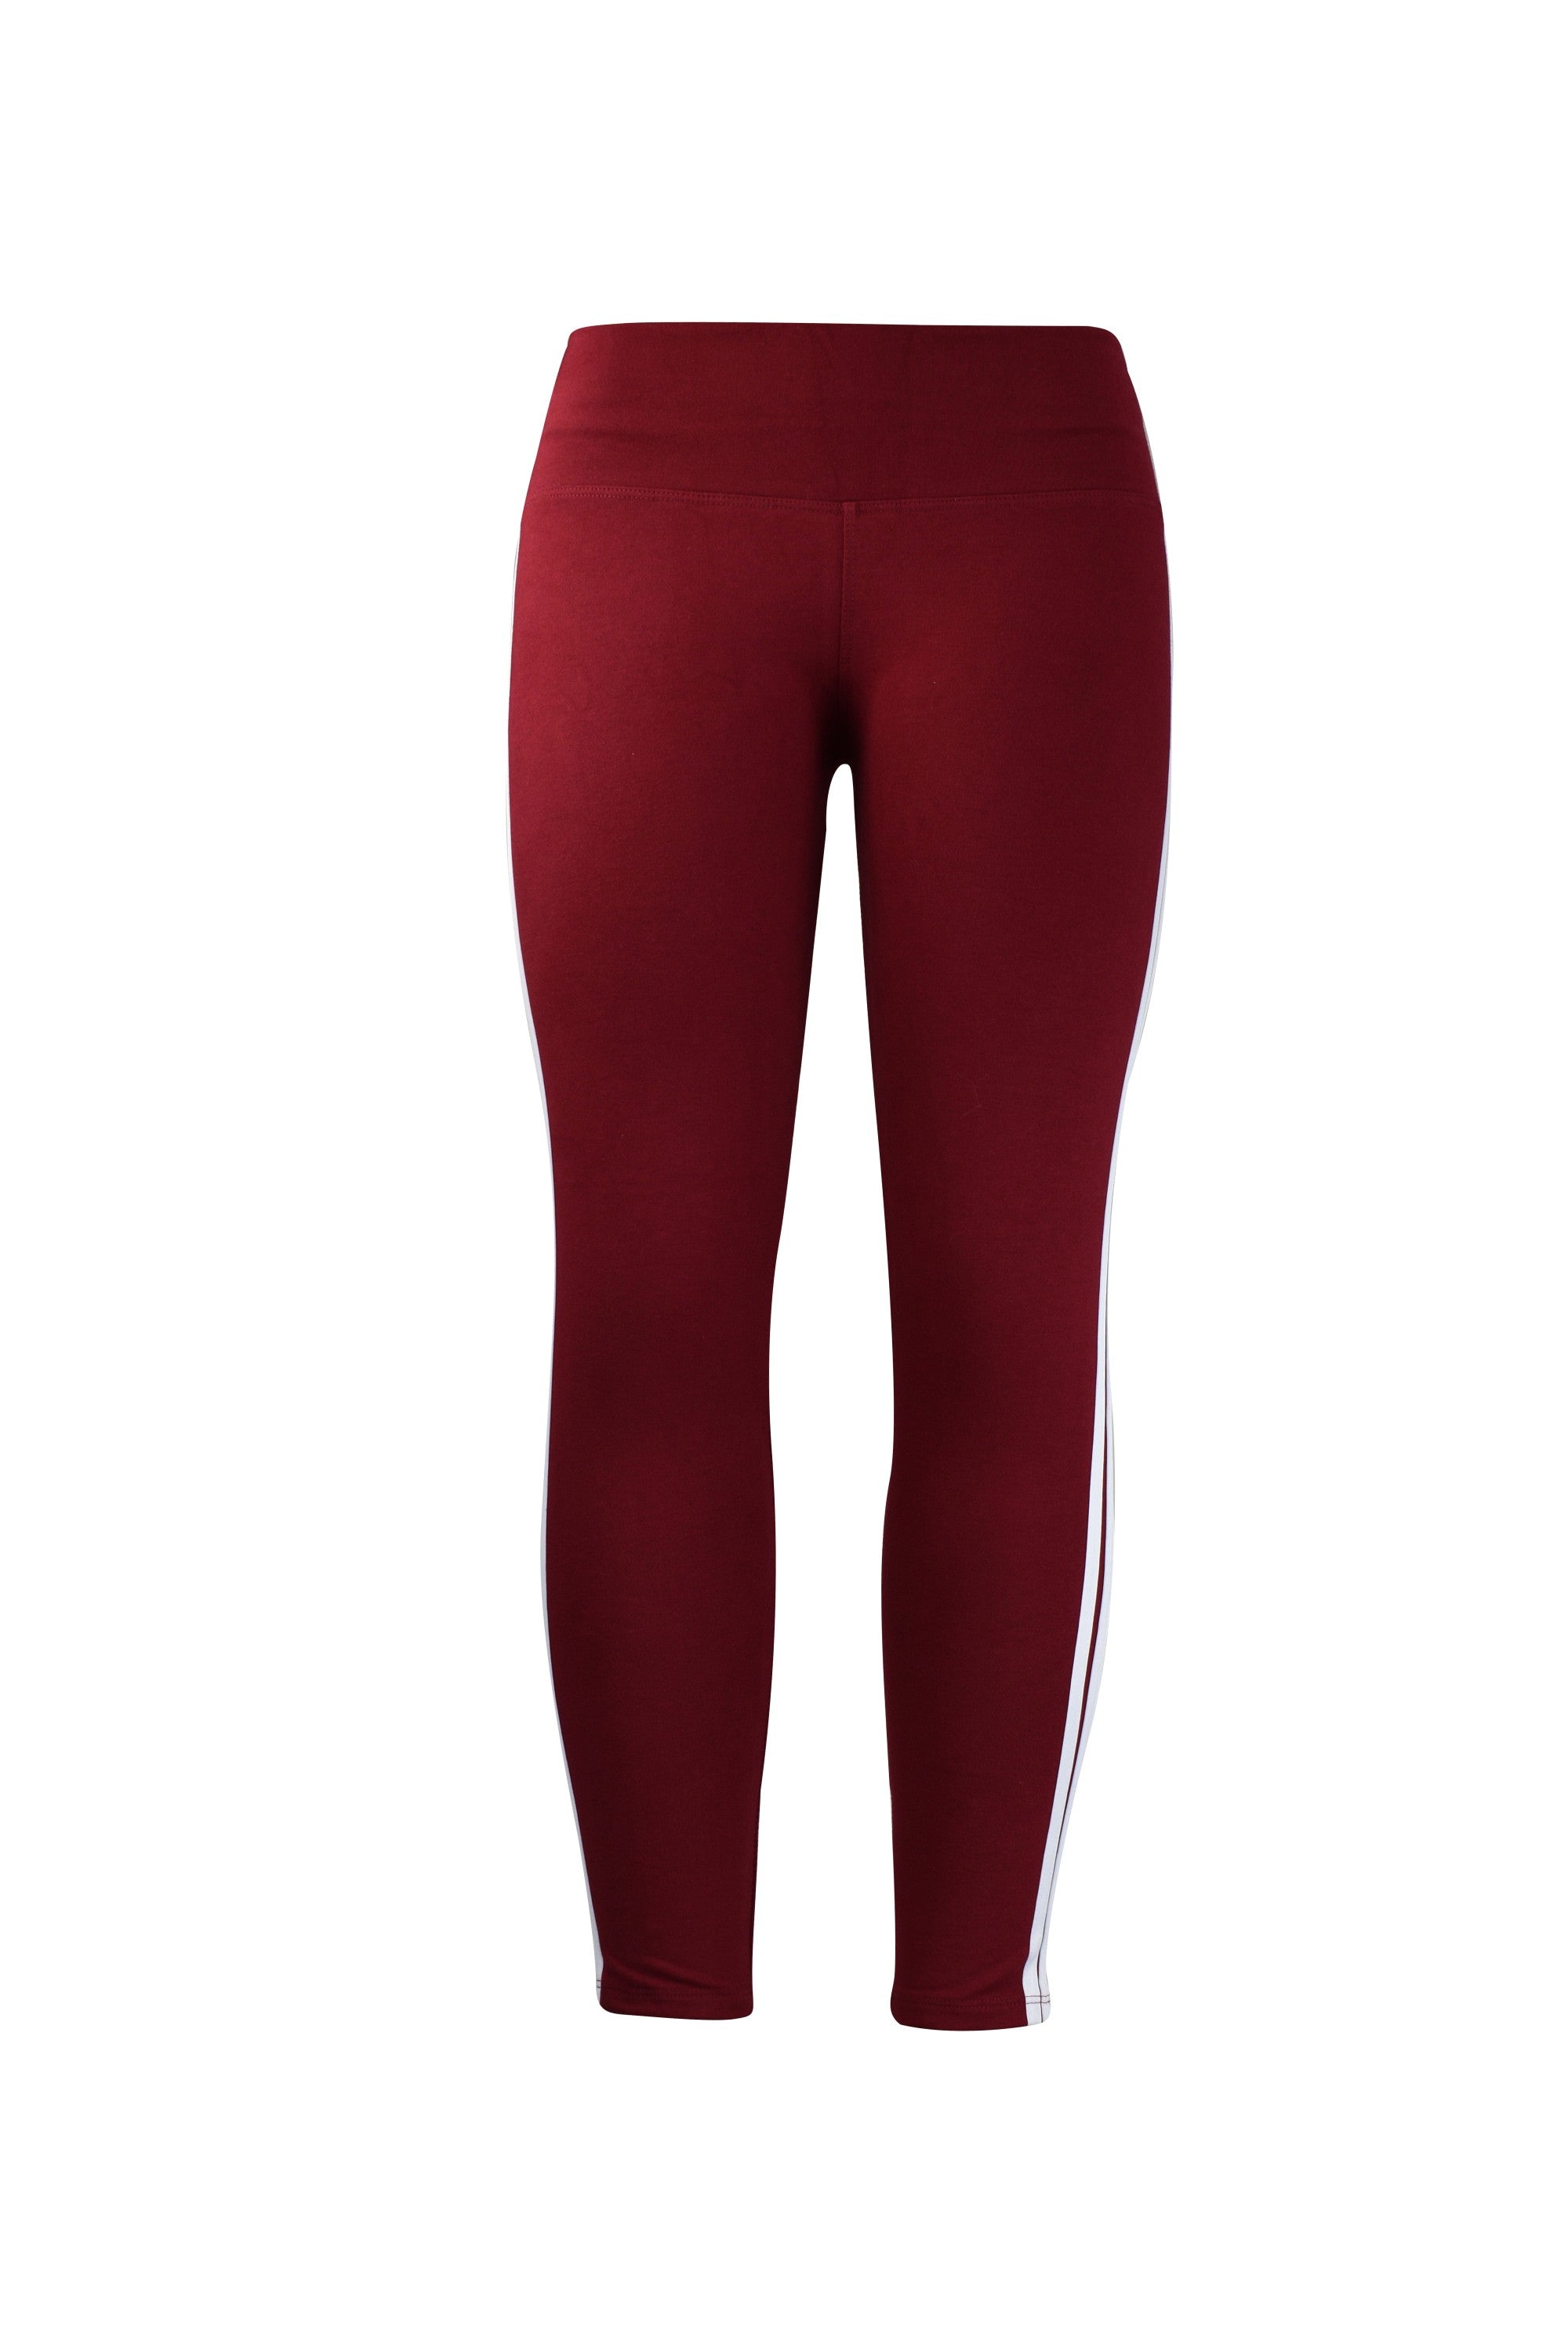 Fashion Ladies Red Leggings With White Stripes Yoga And Workout